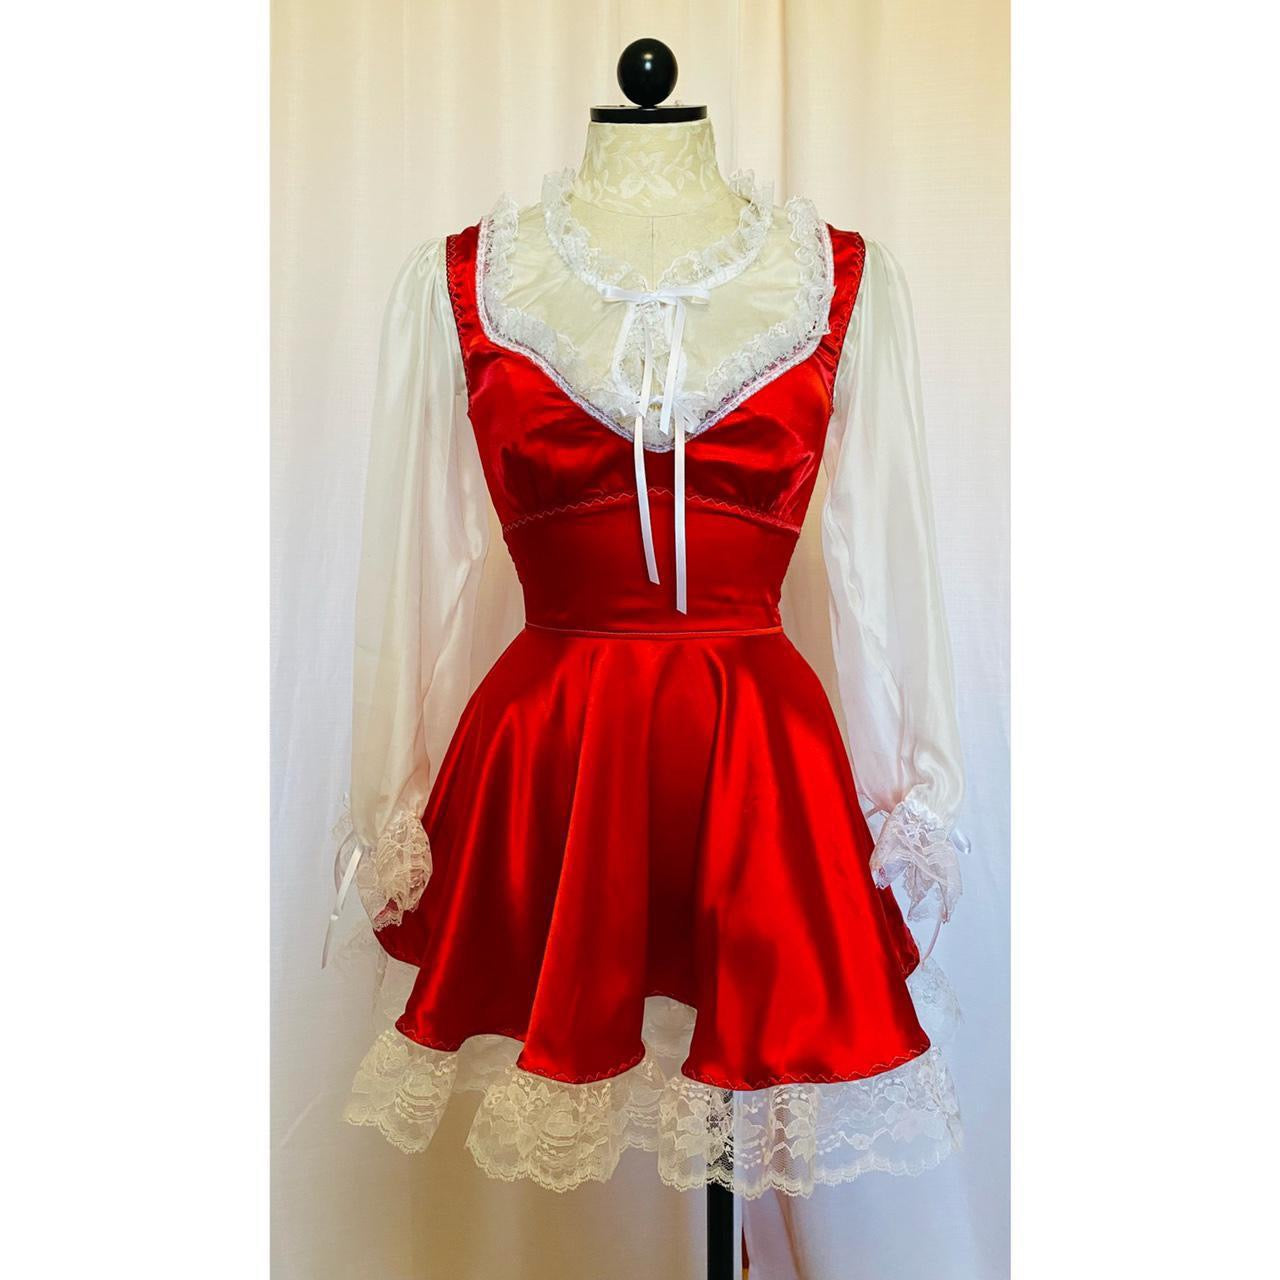 The Siouxsie Dress in Red